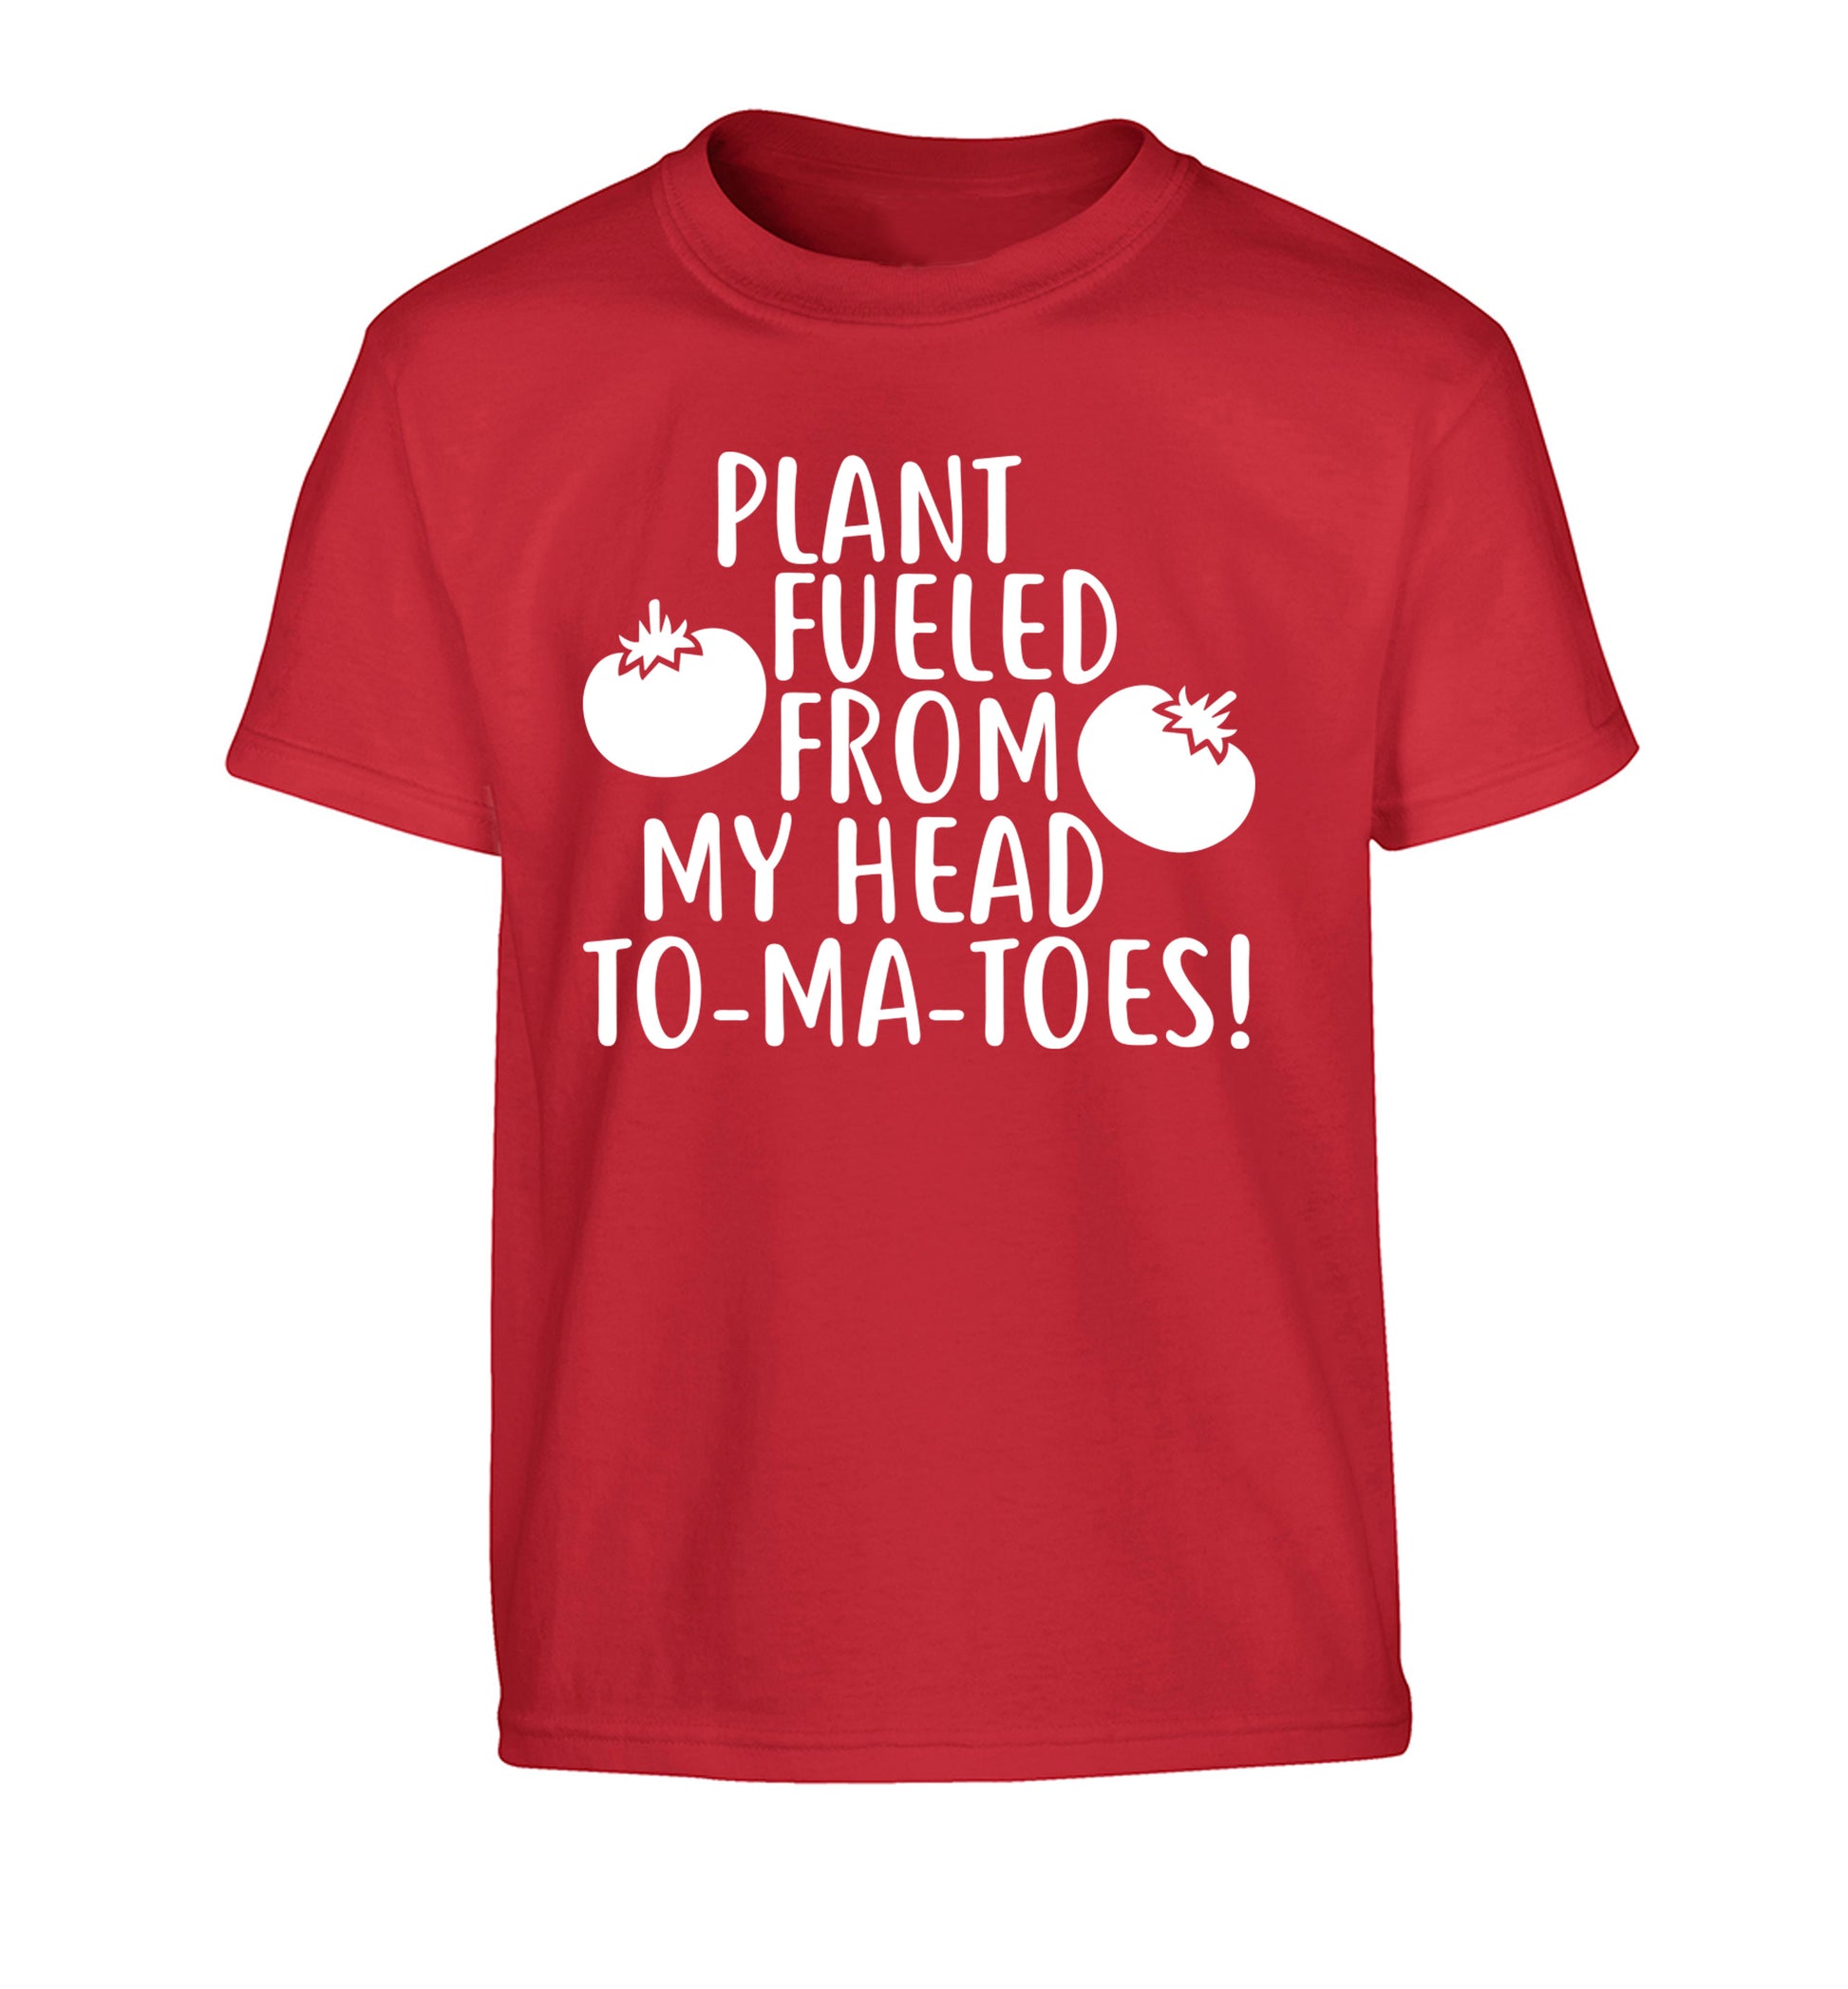 Plant fueled from my head to-ma-toes Children's red Tshirt 12-14 Years